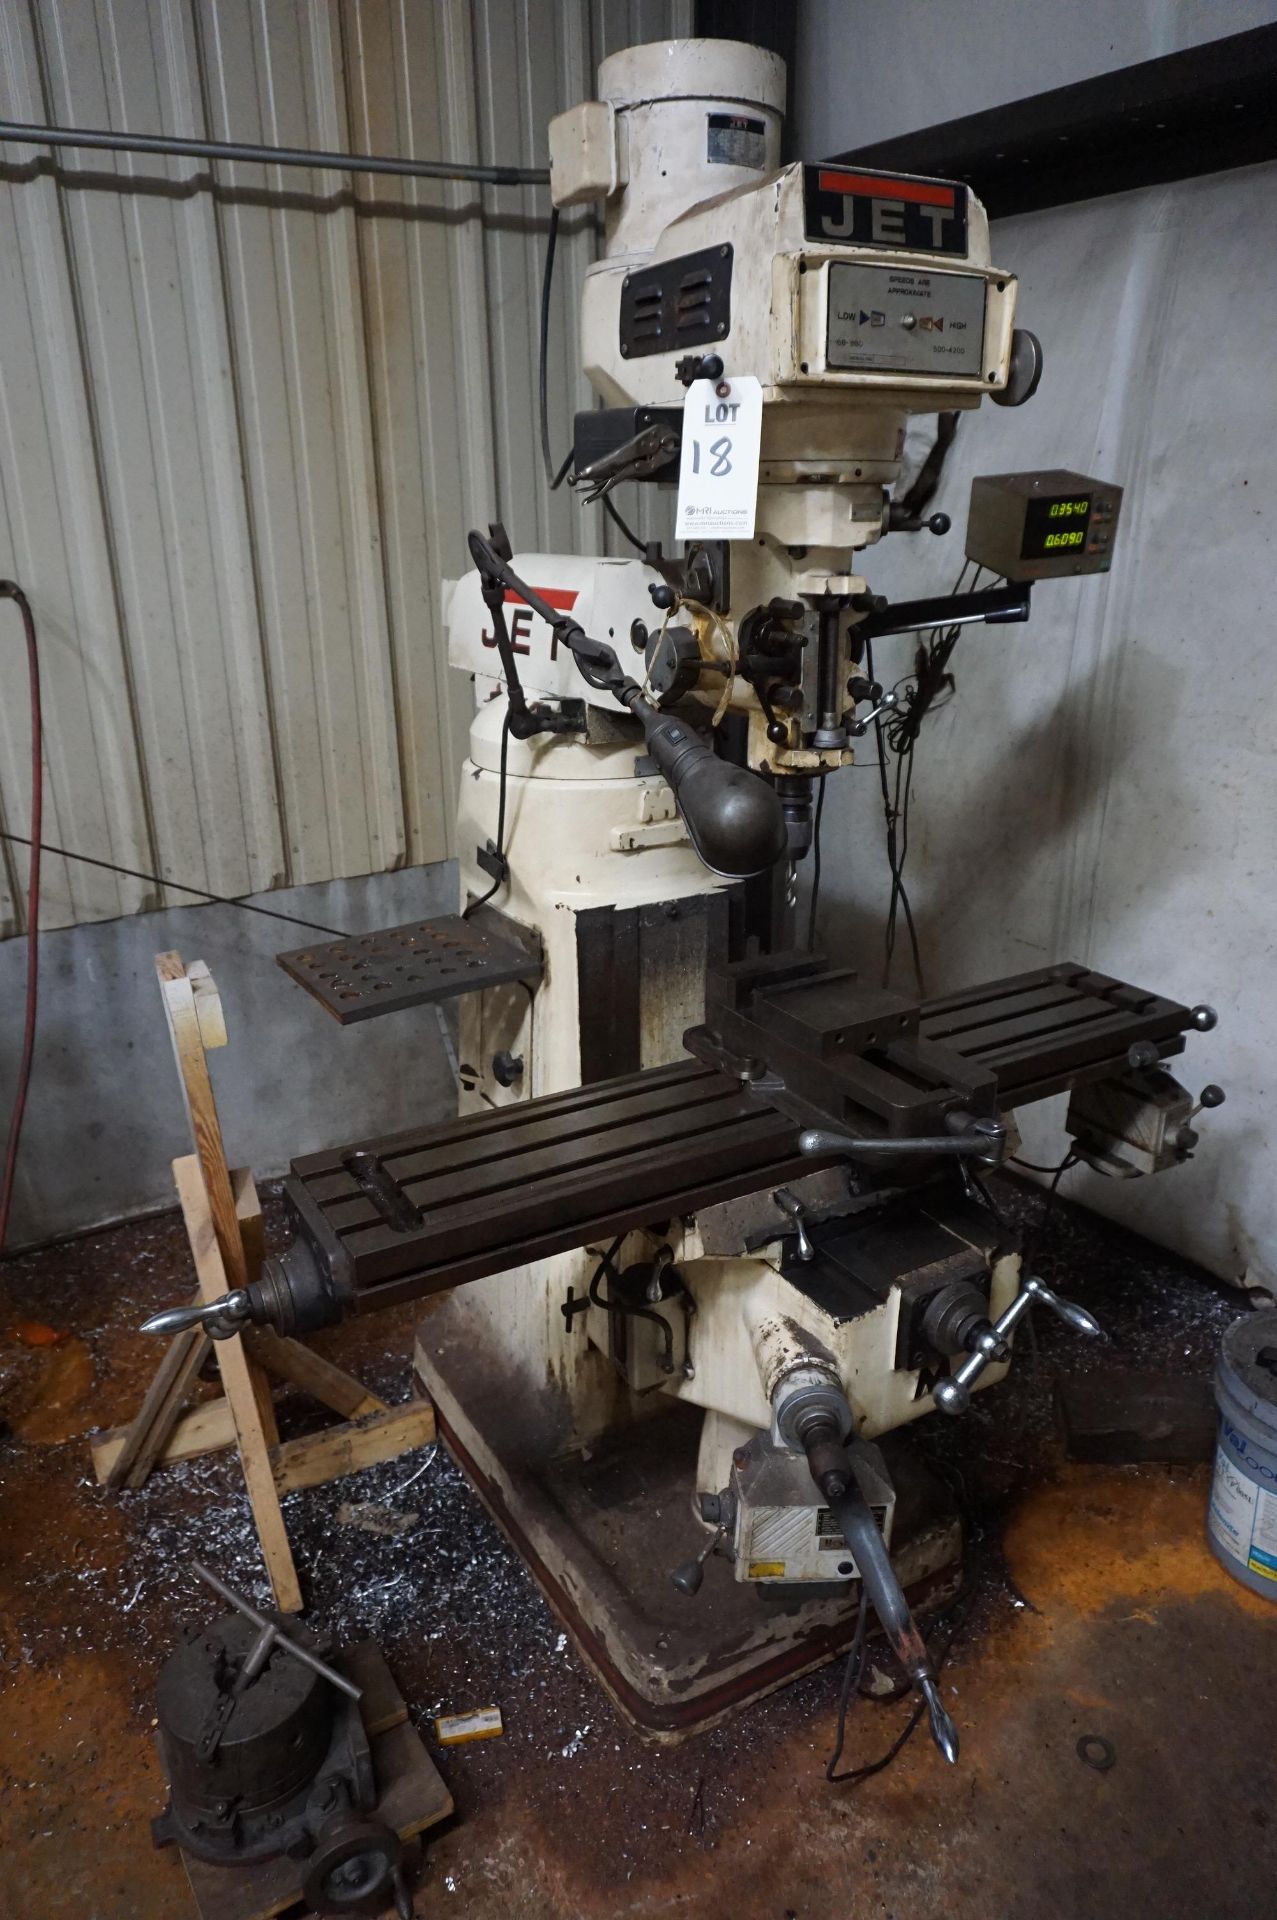 JET MANUAL KNEE MILL S/N 820640 WITH MITUTOYO DIGITAL READOUT, KURT 6" MACHINE VISE, AND ROTARY